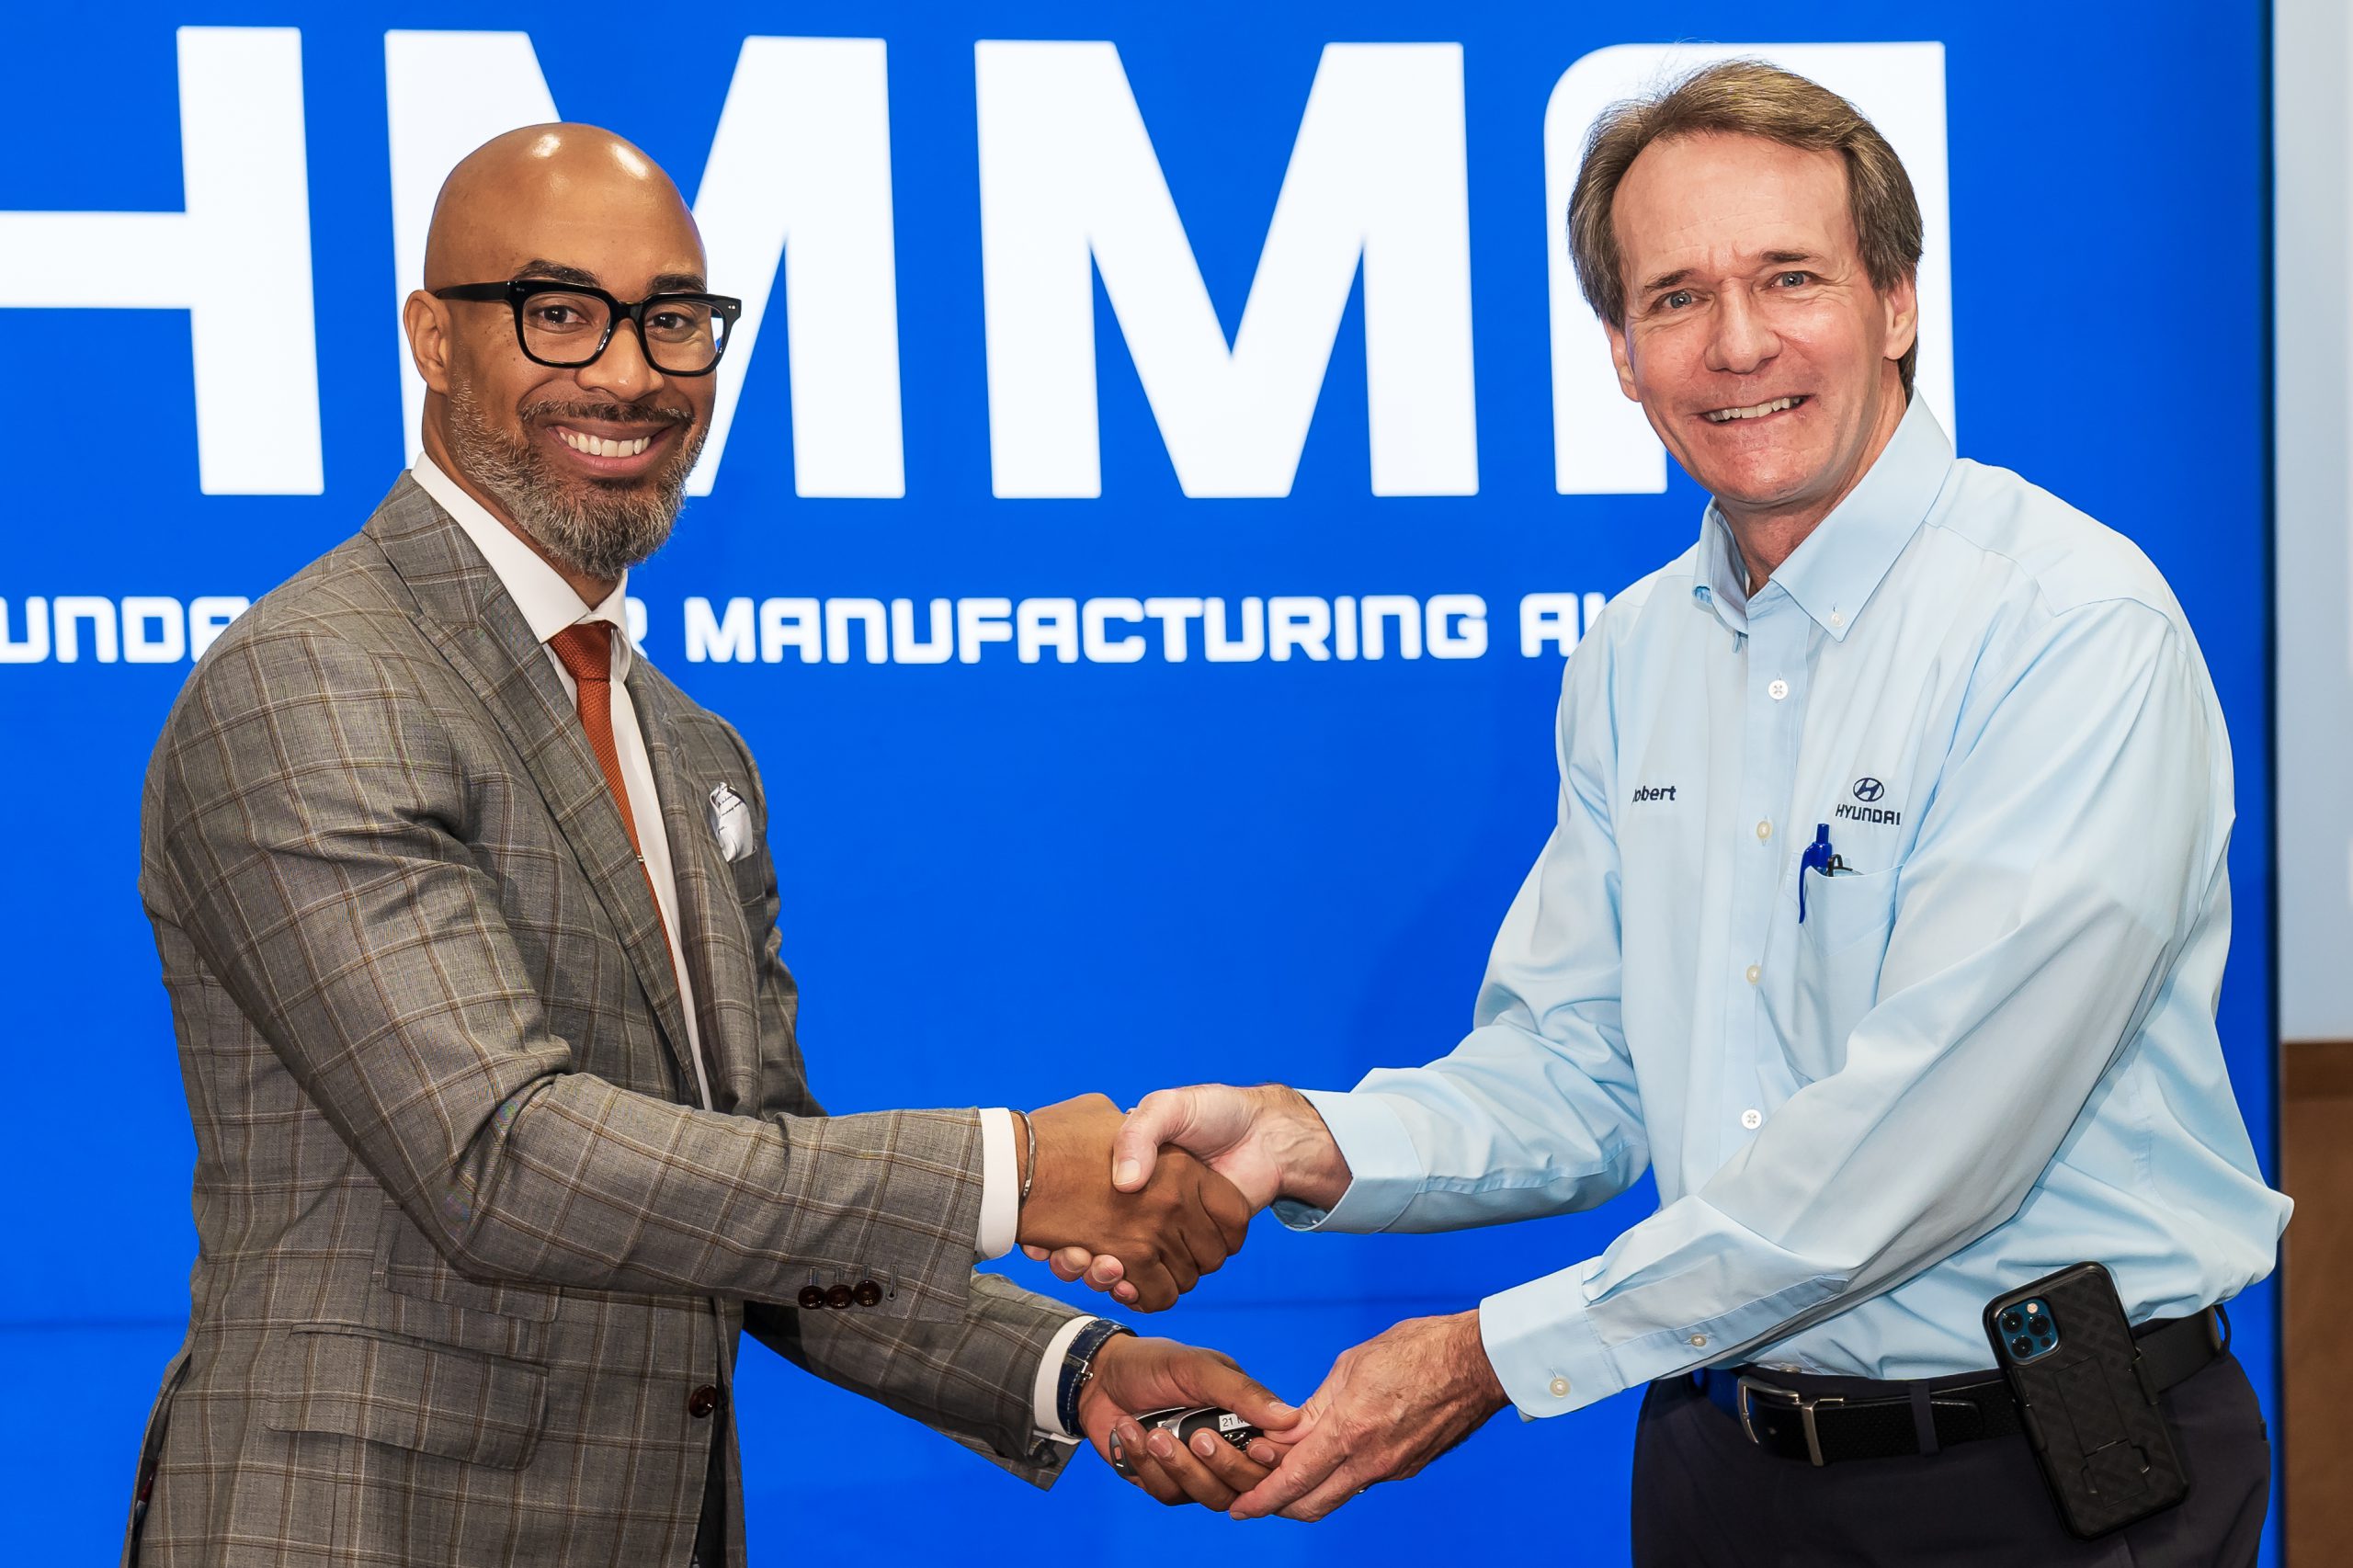 HMMA DONATES VEHICLE TO MODERN MANUFACTURING PROGRAM AT A MONTGOMERY PUBLIC SCHOOL